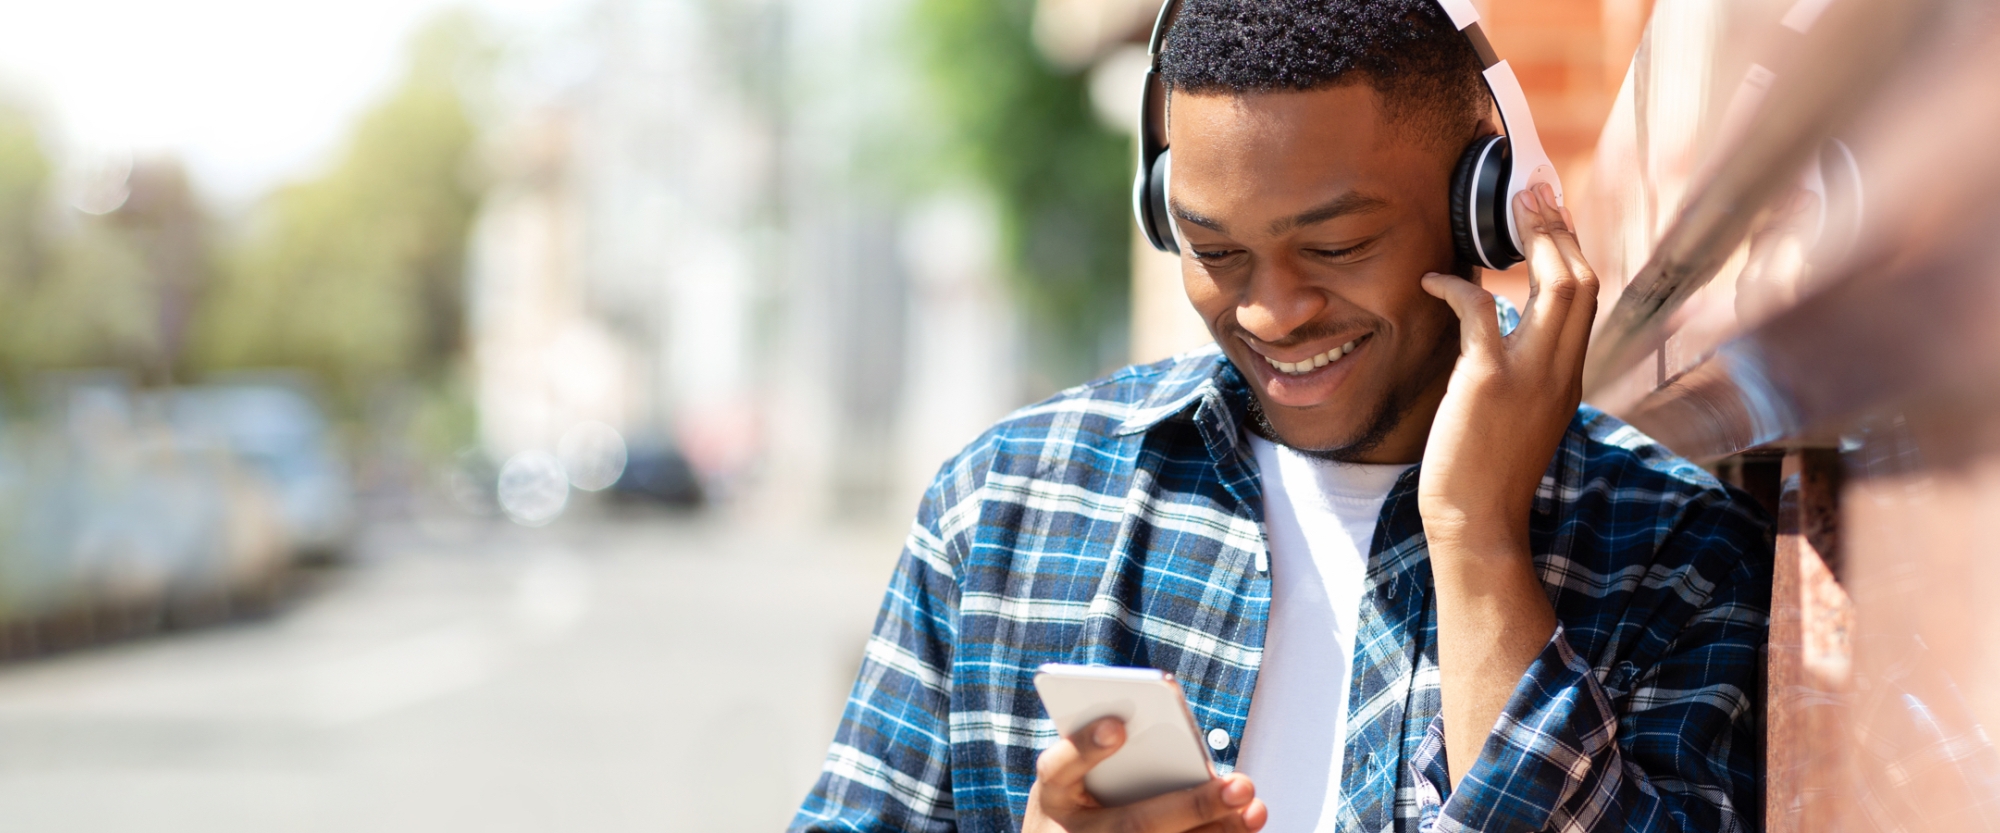 5 Must-Listen Podcasts That'll Inspire You to Be a Better Leader